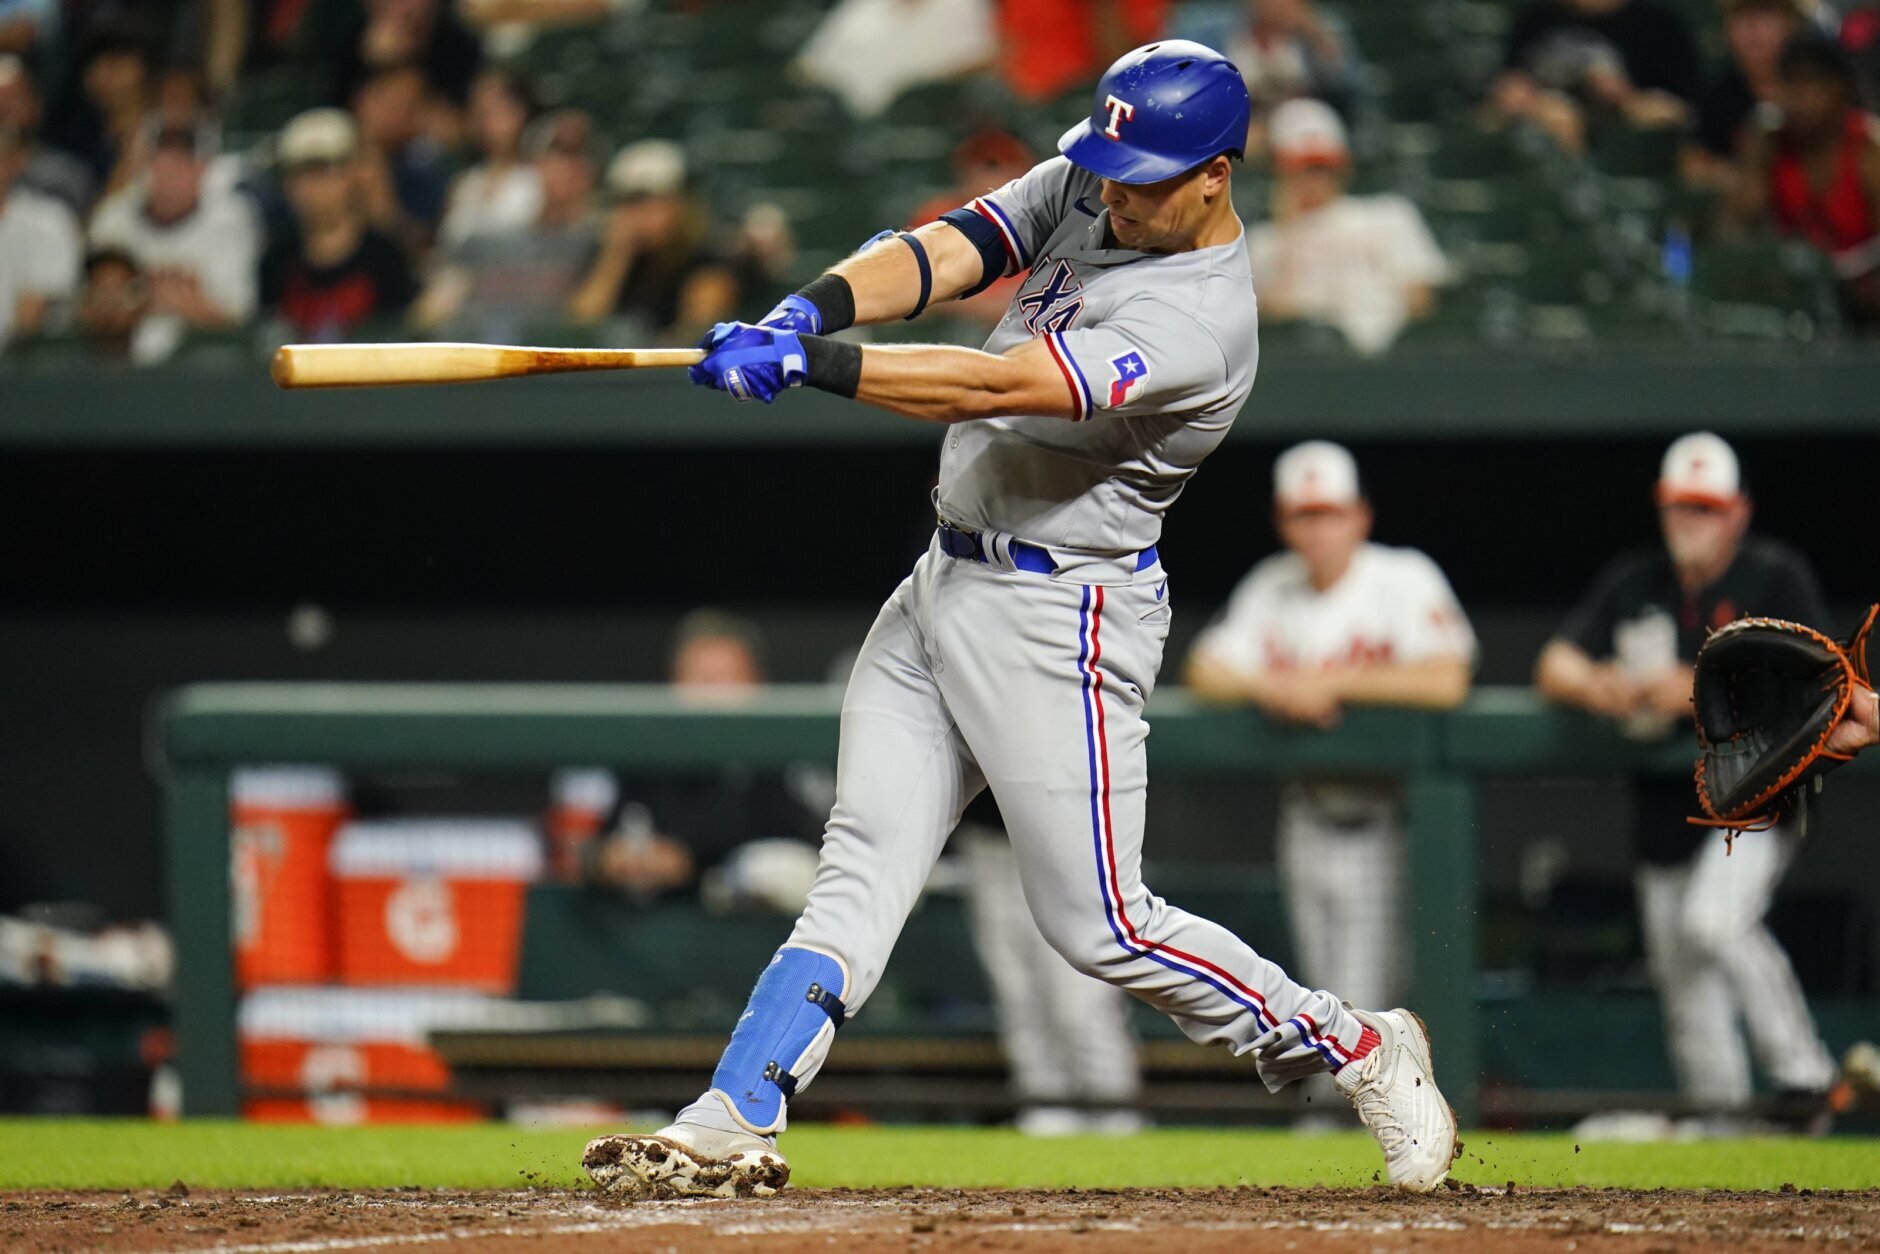 Rangers bash Orioles 13-1 after losing 5-0 - The San Diego Union